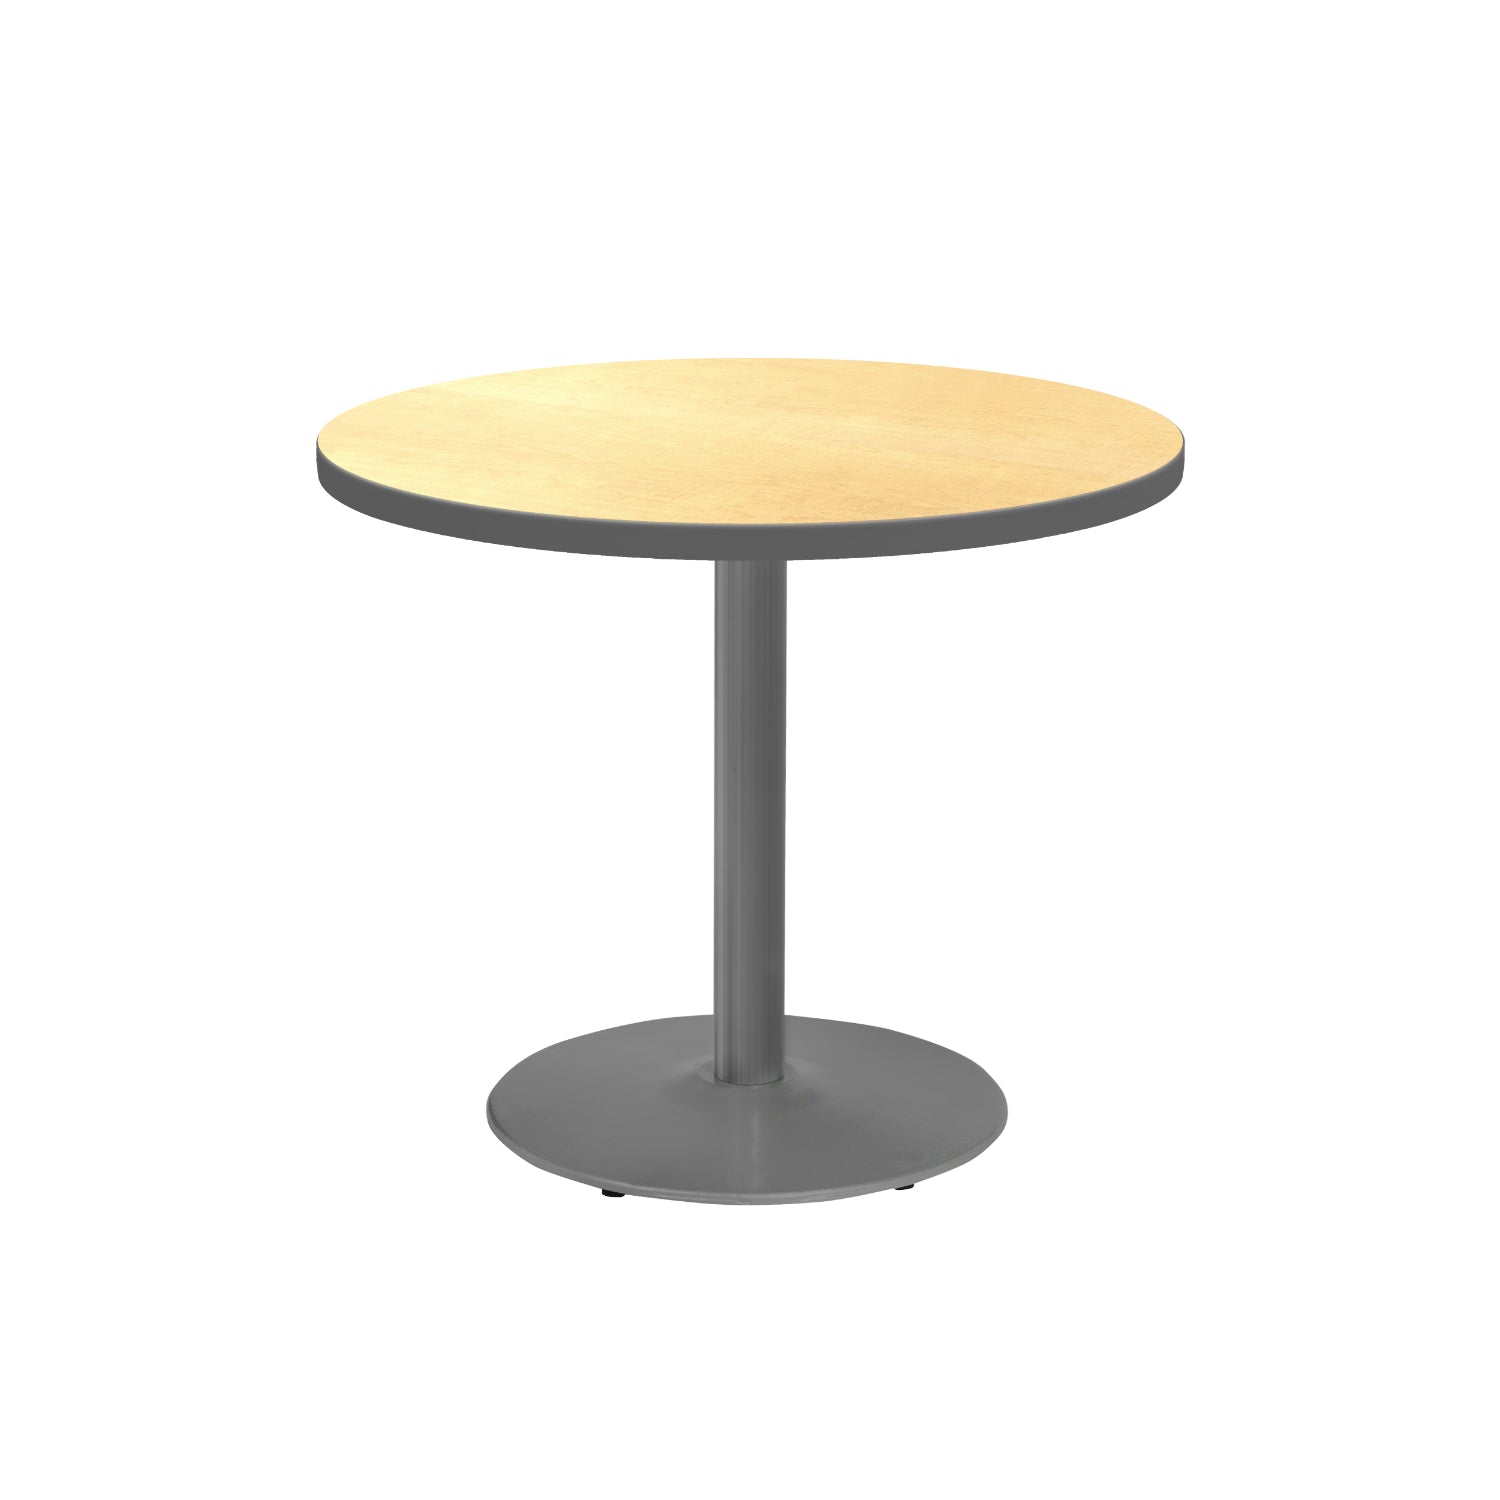 30" Round Sitting Height Café Table